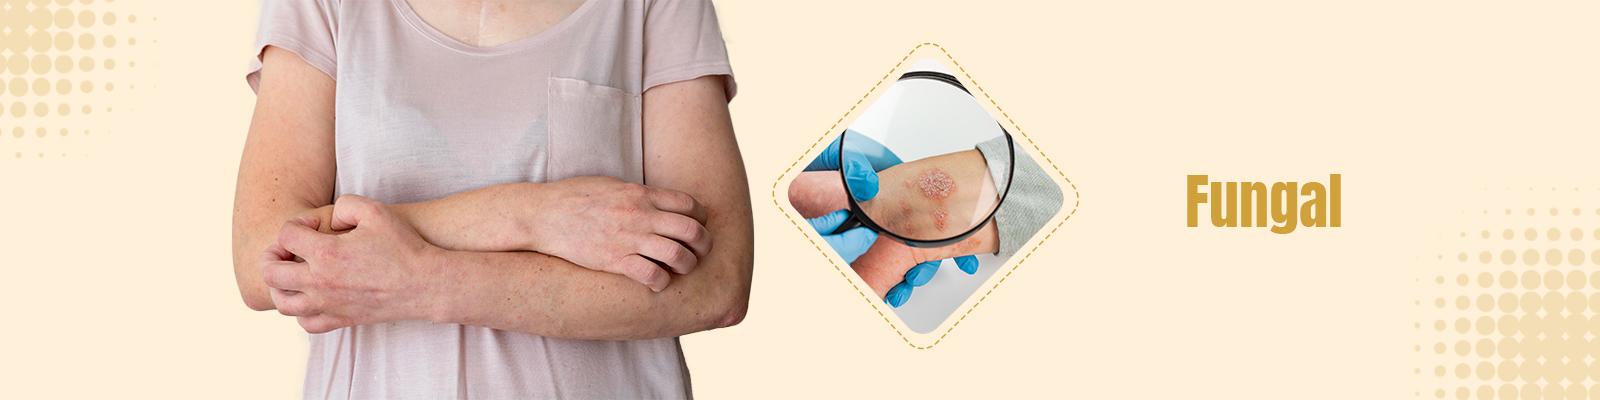  Fungal Infection Treatment In Delhi